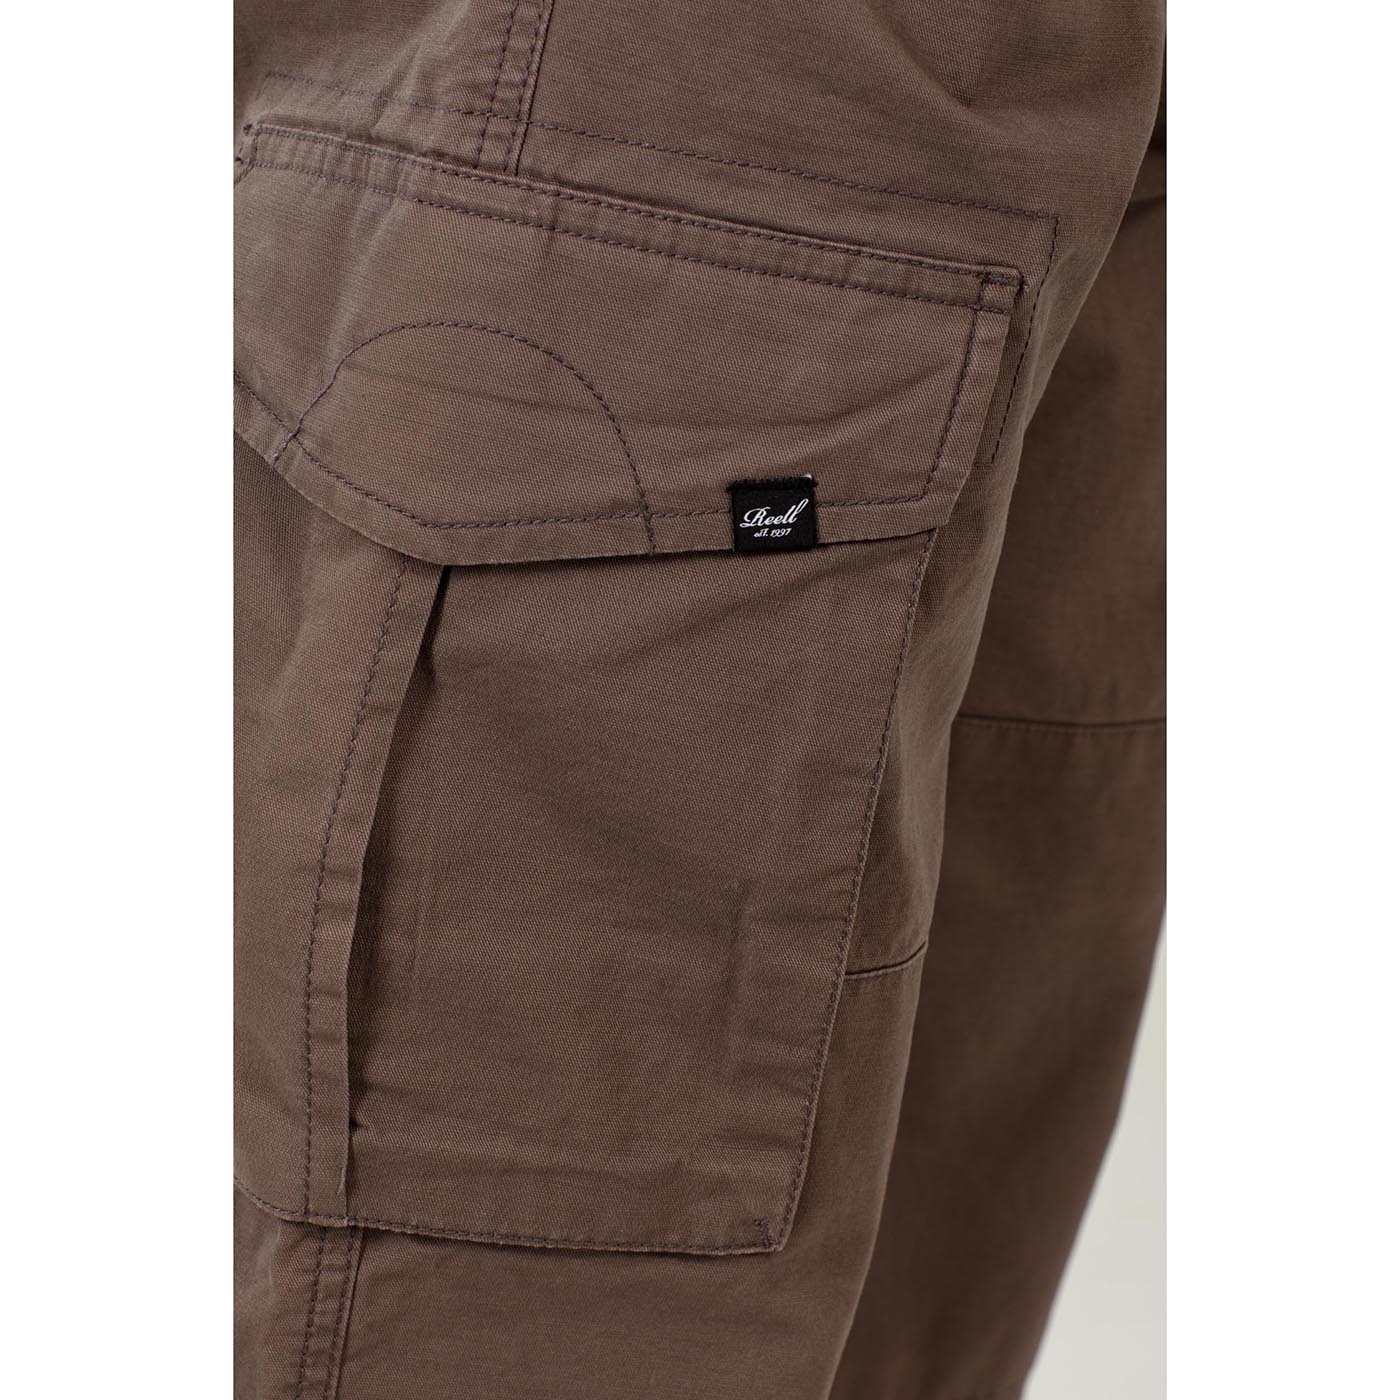 Reell Jeans Flex Cargo LC Pant Brown